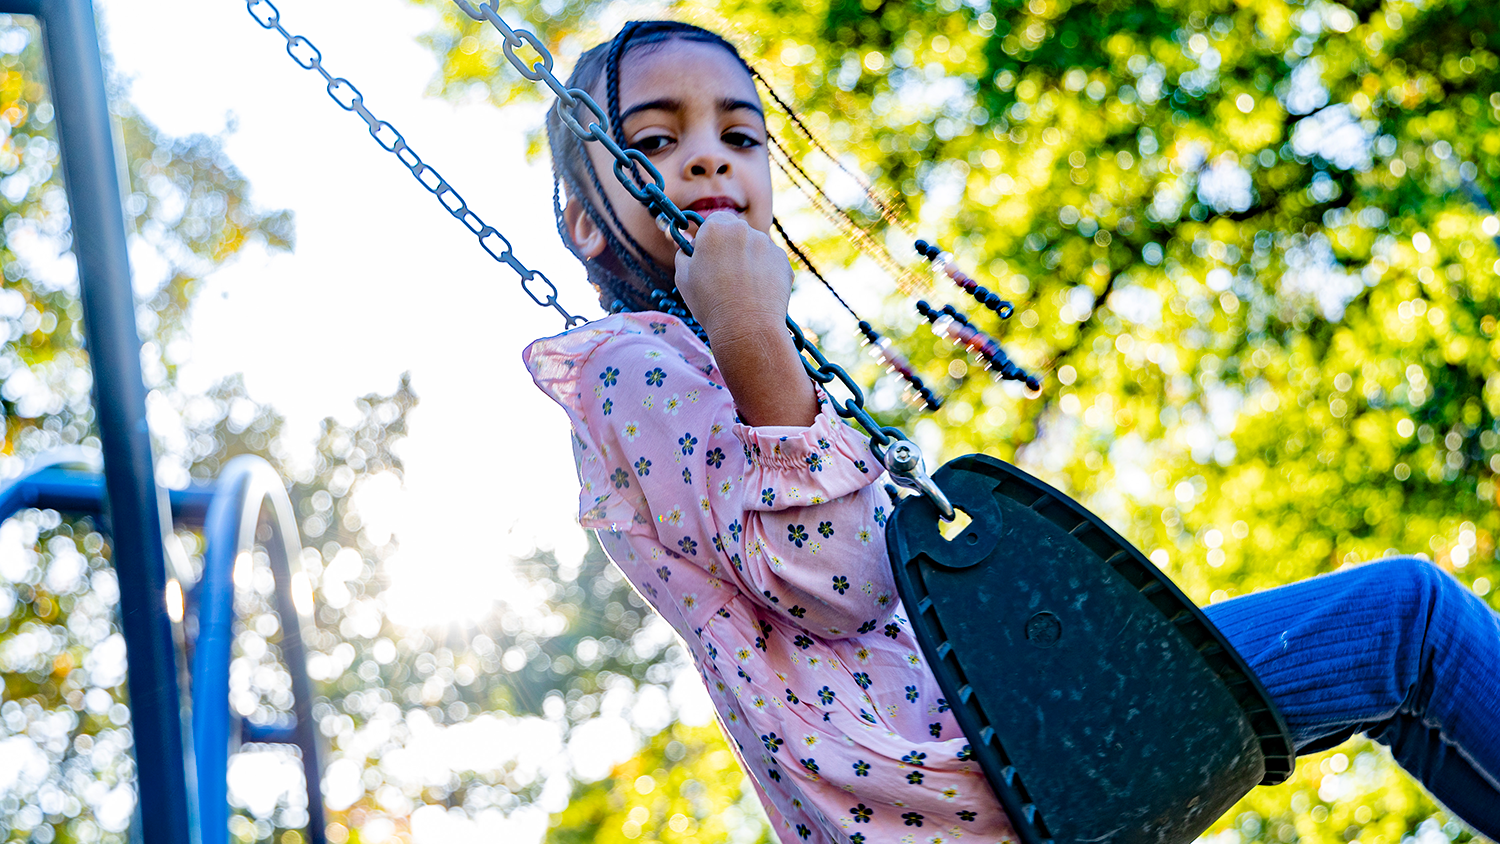 A young child looks down at the camera while swinging in a city park.